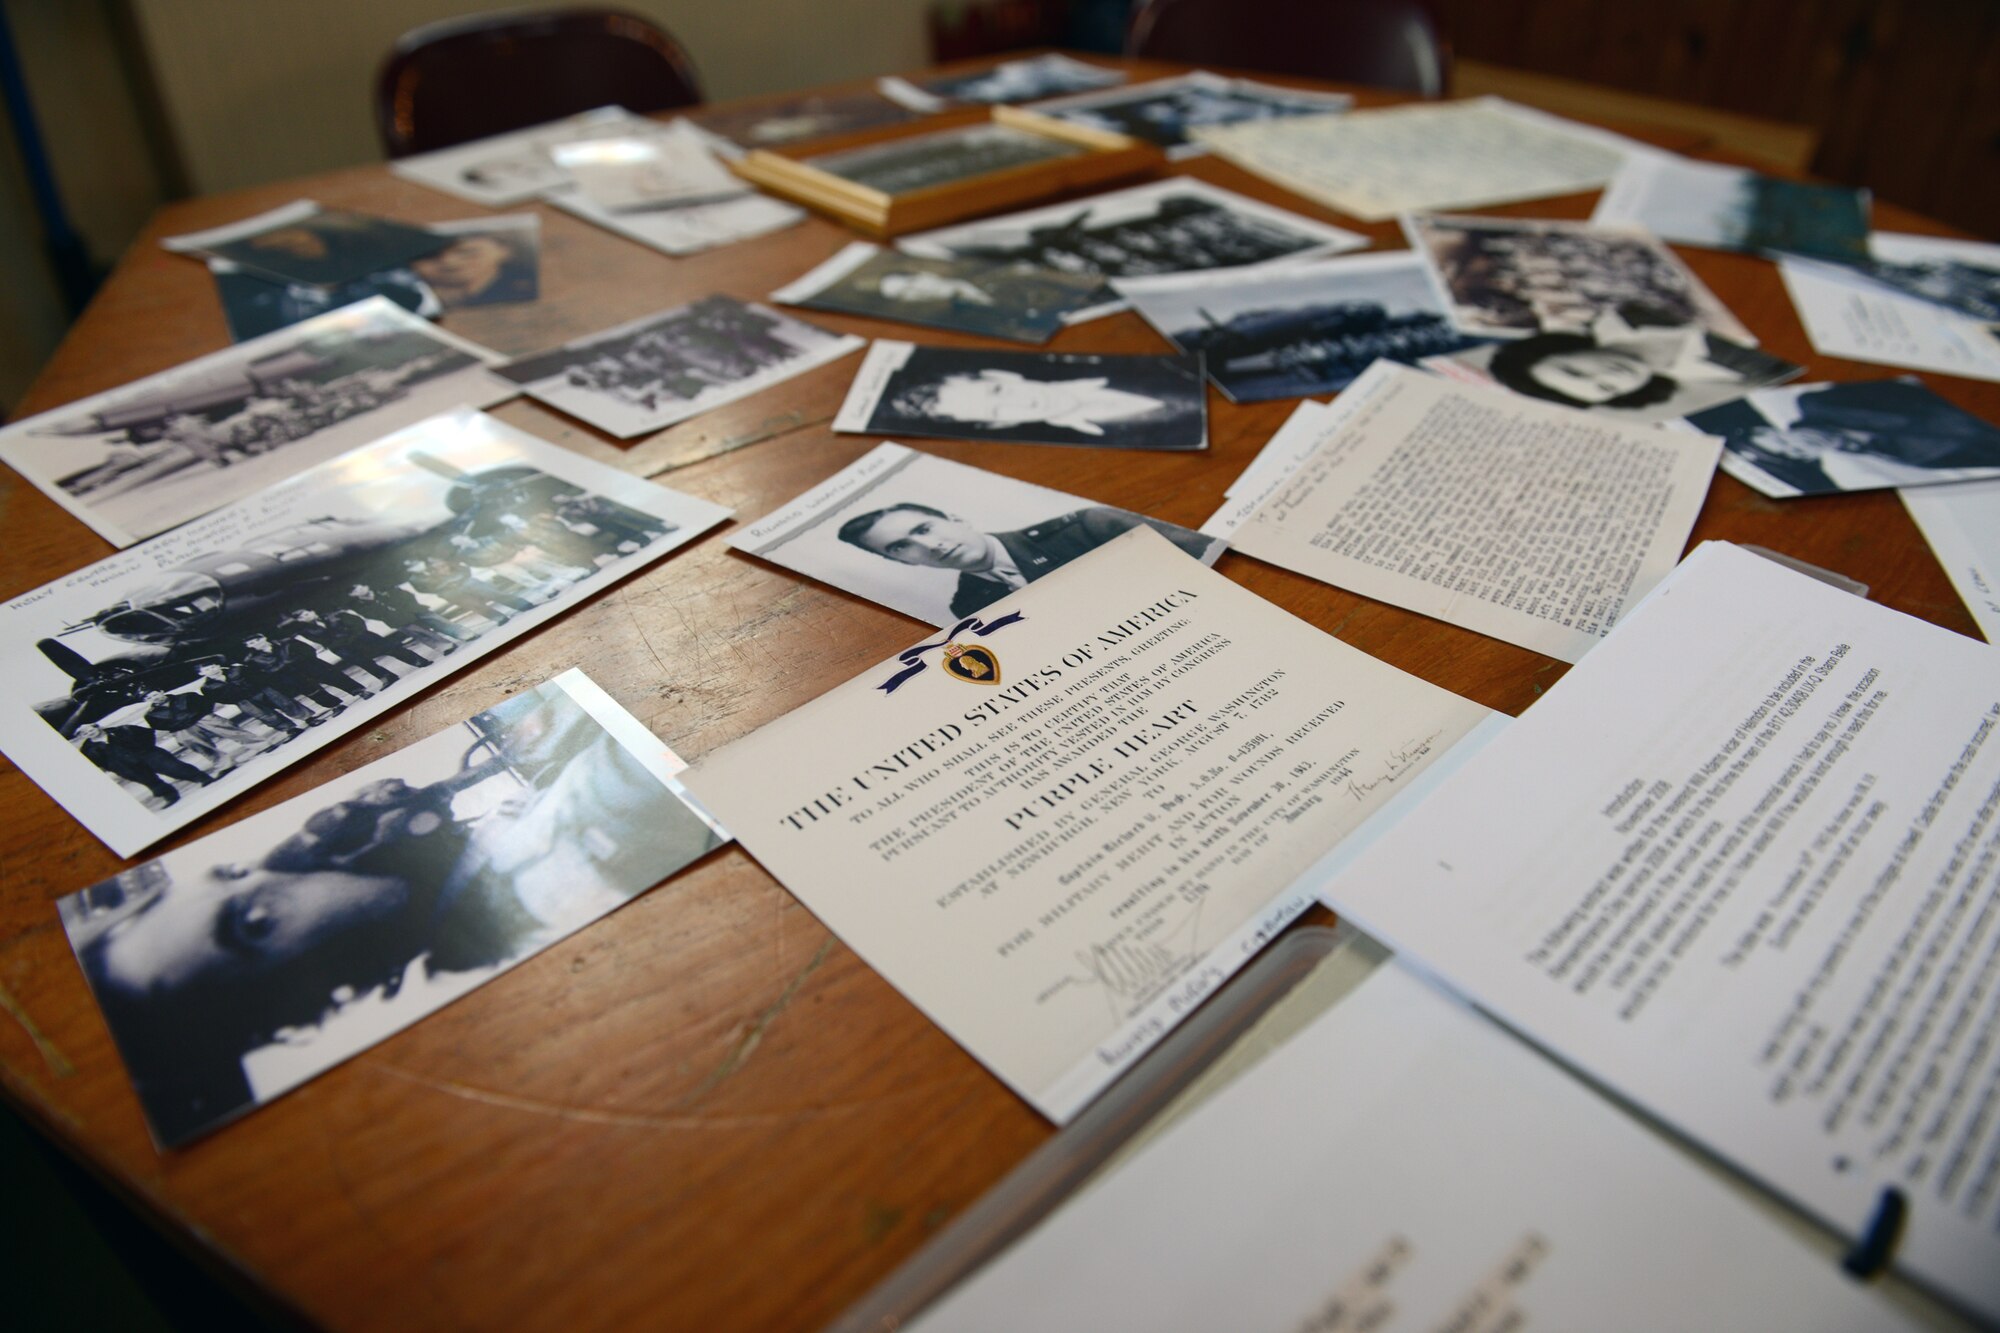 HELMDON, United Kingdom – Old photos and documents sits on a table in the Parish Church of St. Mary Magdalene in Helmdon Nov. 2. The village and 422nd Air Base Group held a ceremony in honor of the 327th Bombardment Squadron, VIII Bomber Command, Airmen killed Nov. 30, 1943, when they left RAF Poddington on a bombing mission to Germany, and their plane crashed at Astwell Castle Farms. (U.S. Air Force photo by Tech. Sgt. Chrissy Best)